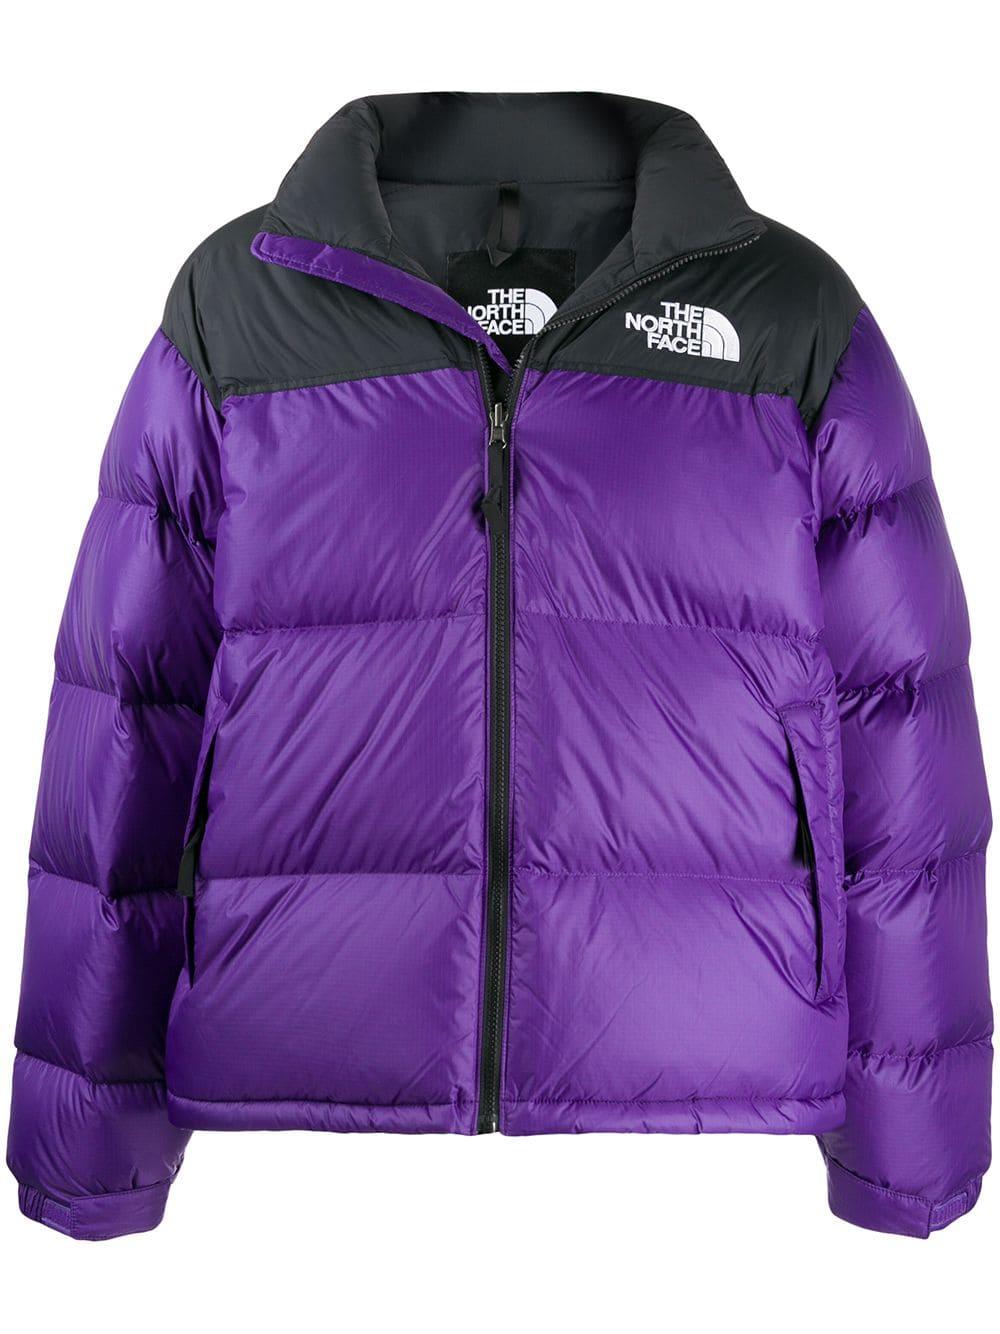 The North Face The Nort Face 1996 Retro Npse Jacket in Purple for Men - Lyst